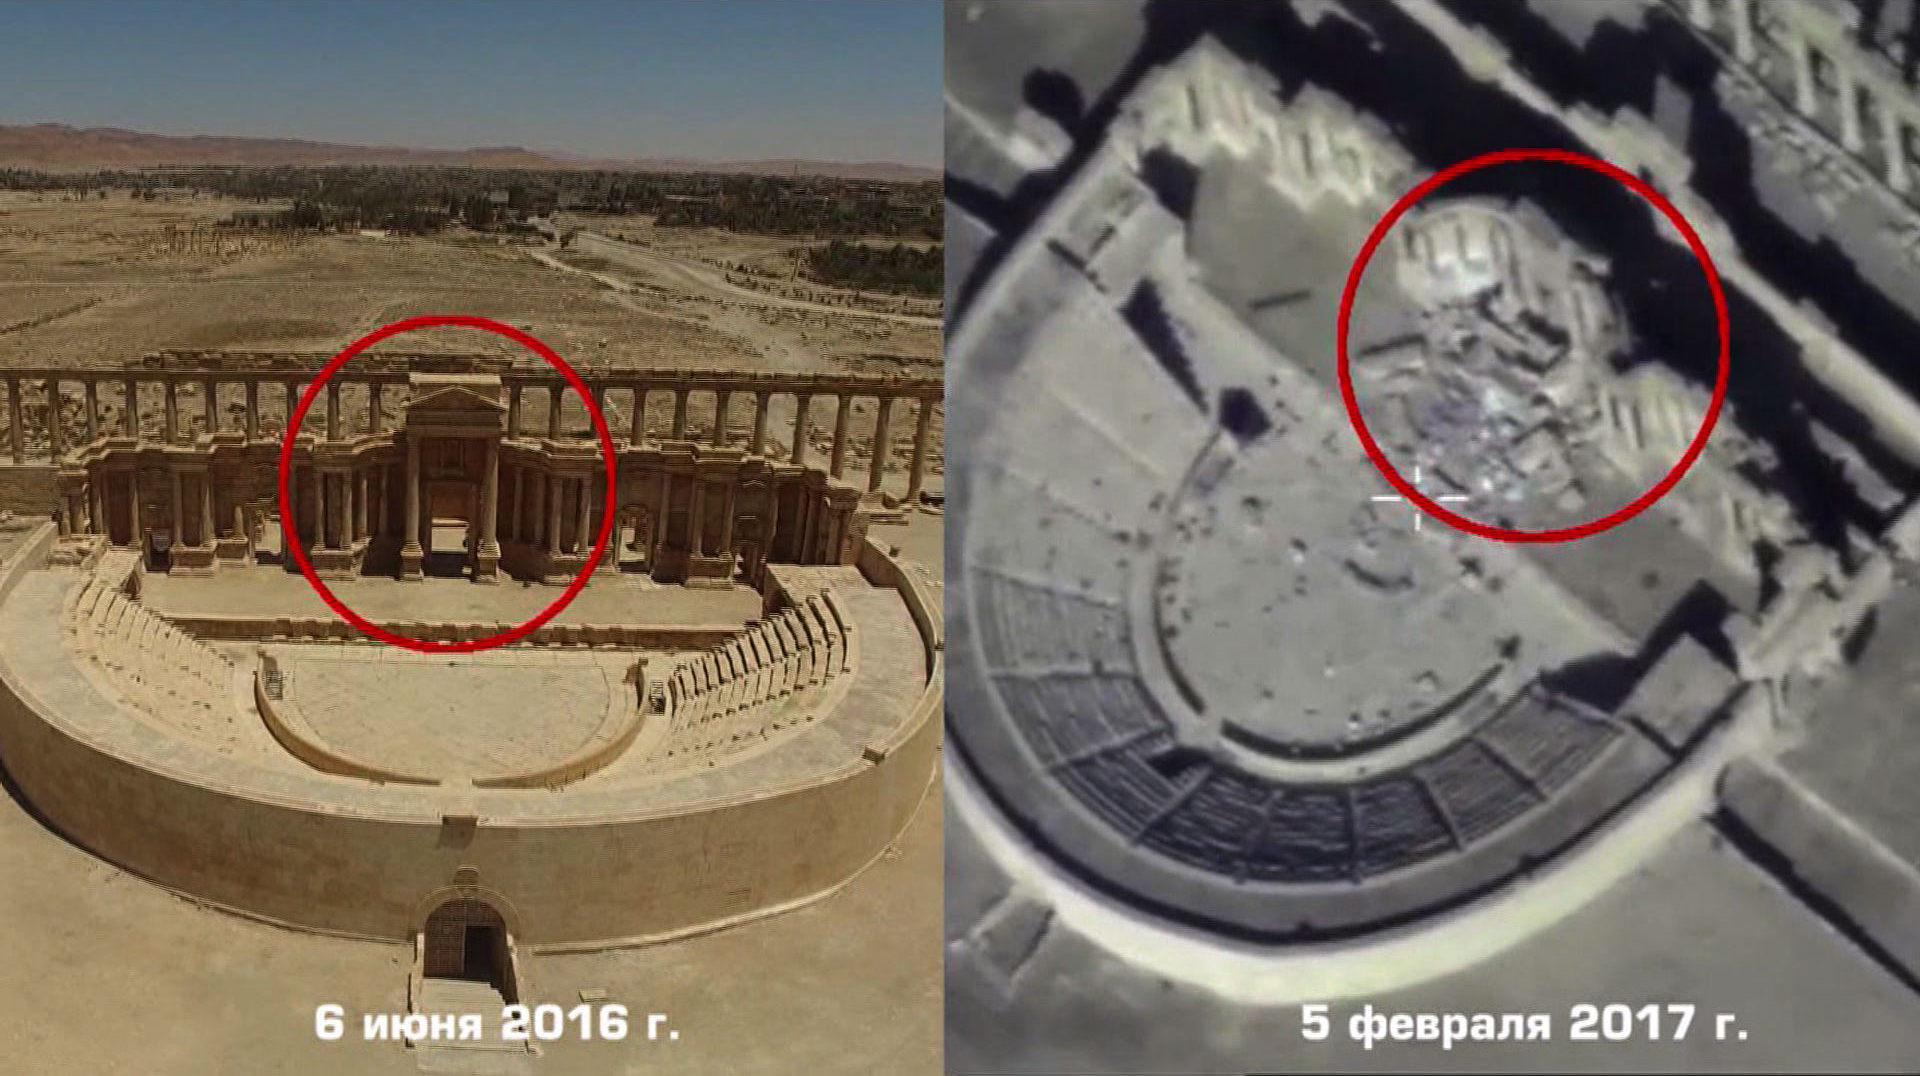 An image grab taken from video footage made available on the Russian Defence Ministry's official website on February 13, 2017, reportedly shows destruction to the Roman amphitheatre monumnent in Palmyra, Syria. Russia's military on Monday released drone footage showing more destruction of treasured monuments by the Islamic State in Syria's Palmyra since jihadists recaptured the UNESCO World Heritage Site late last year. The black-and-white video dated February 5 shows part of the Roman amphitheatre reduced to rubble and the tetrapylon, a 16-columned structure that marked one end of the ancient city's colonnade, wiped out. / AFP PHOTO / Russian Defence Ministry / HO / RESTRICTED TO EDITORIAL USE - MANDATORY CREDIT "AFP PHOTO / HO / Russian Defence Ministry - NO MARKETING NO ADVERTISING CAMPAIGNS - DISTRIBUTED AS A SERVICE TO CLIENTS